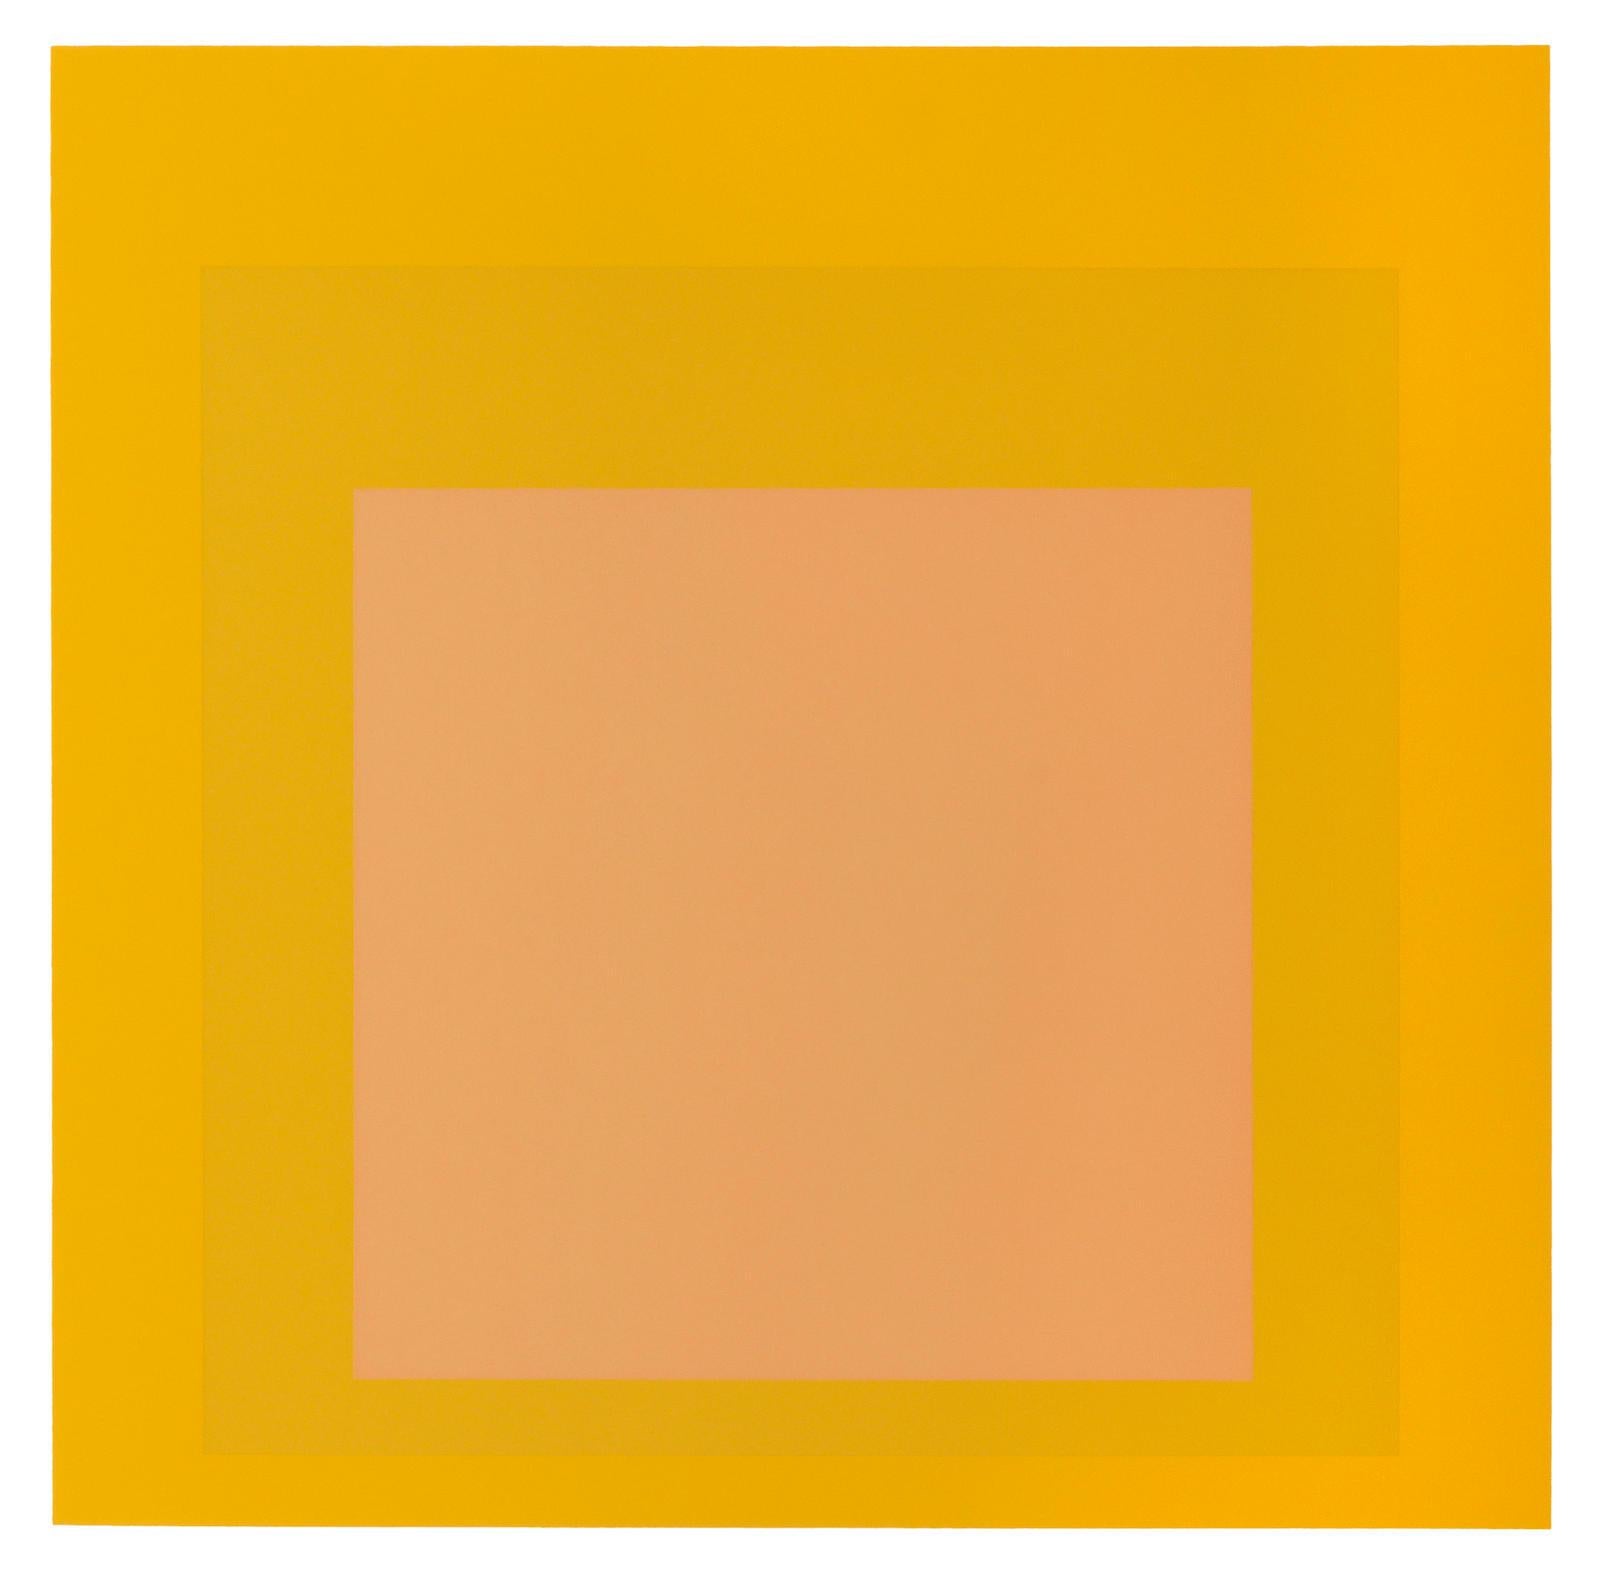 Formulation: Articulation I & II -- Colour Theory, Minimalism by Josef Albers 6